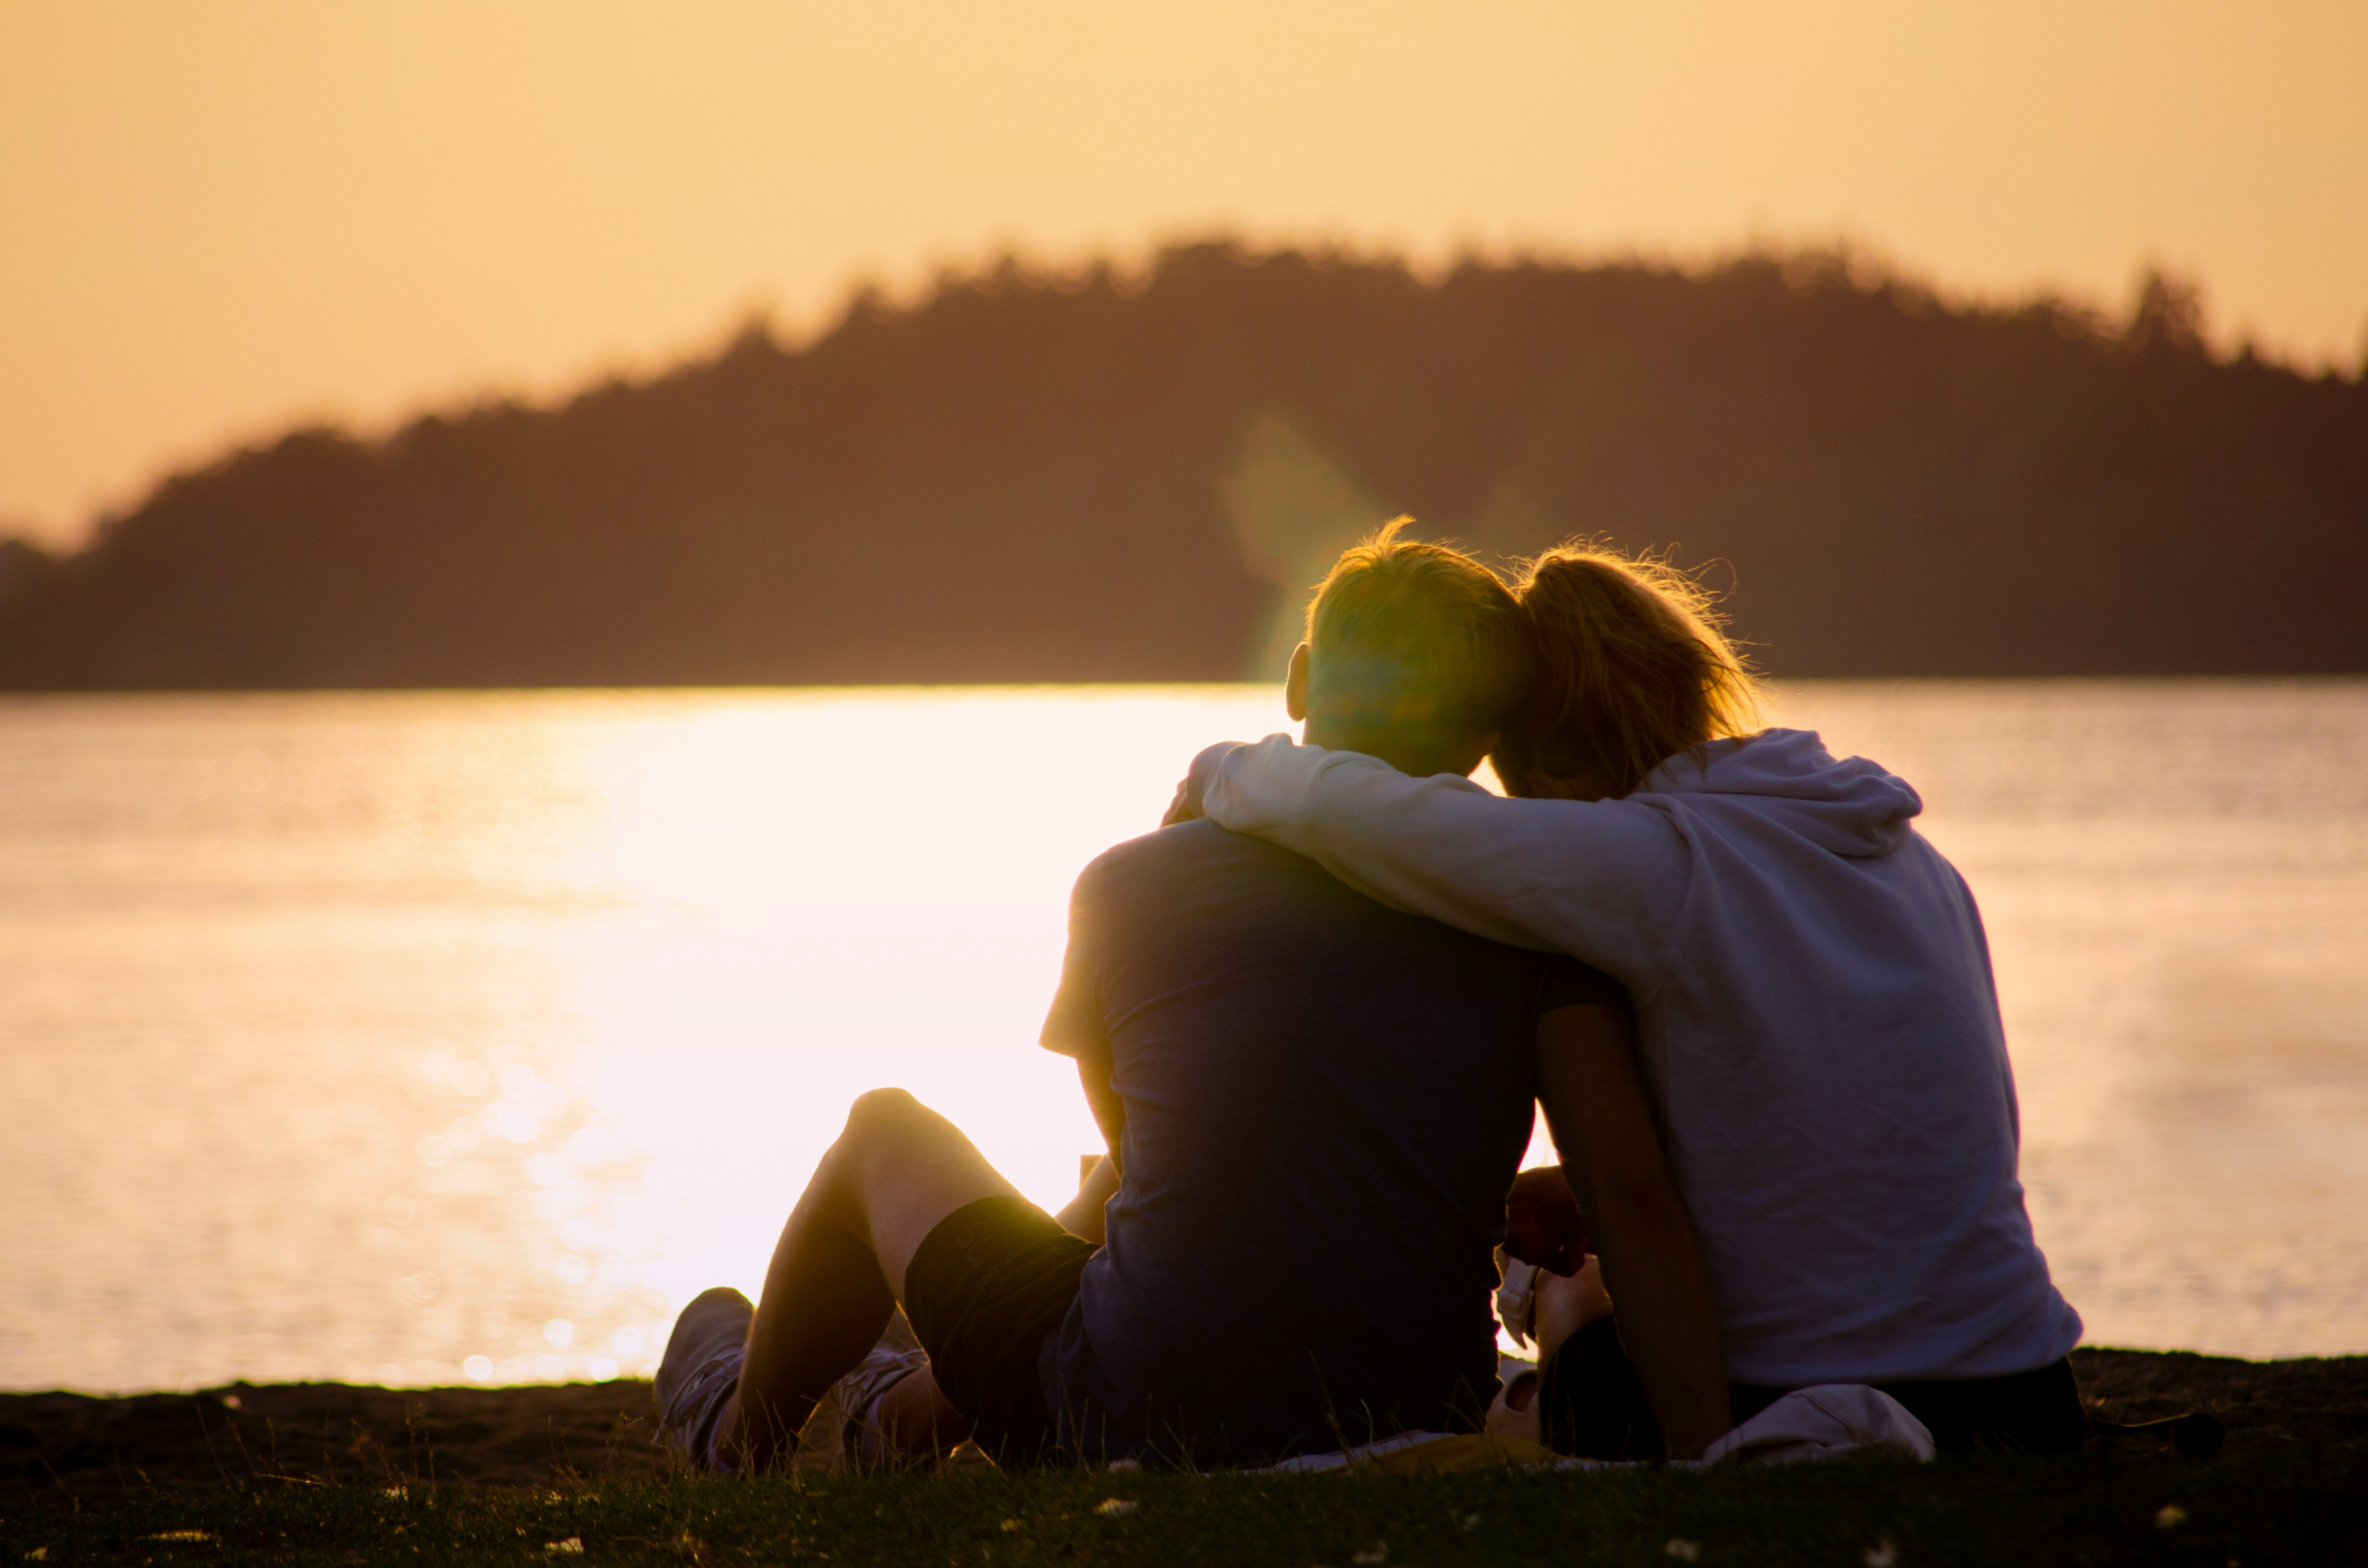 Two people sitting together at a lake